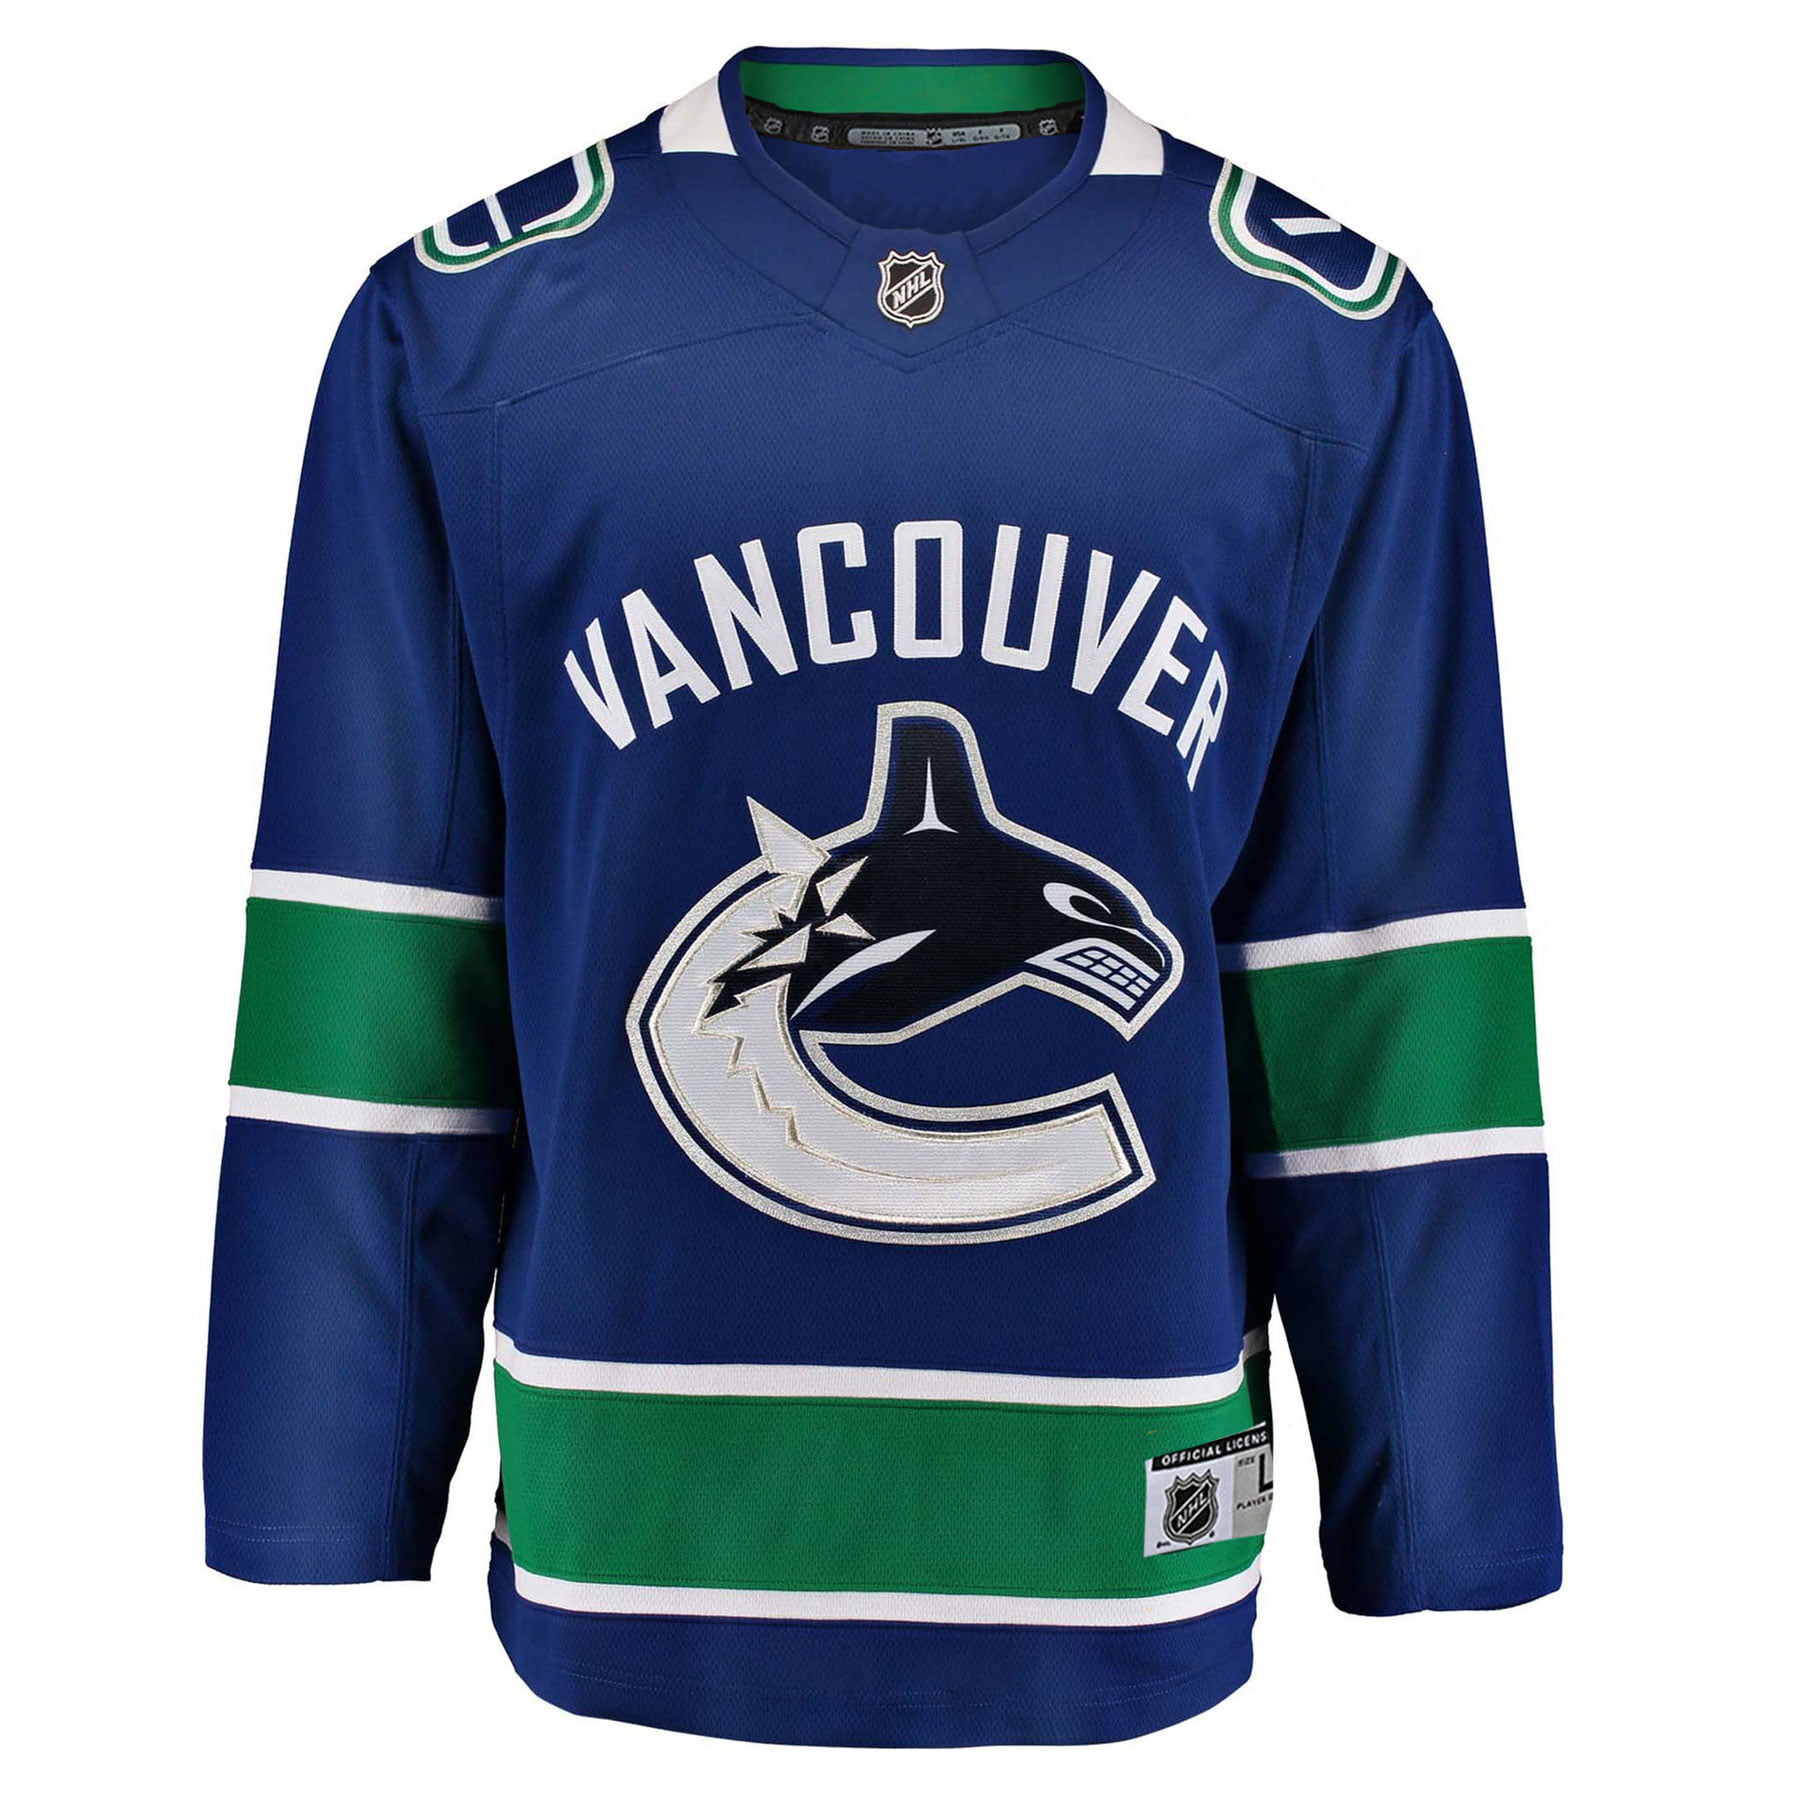 Vancouver Canucks NHL Premier Youth 